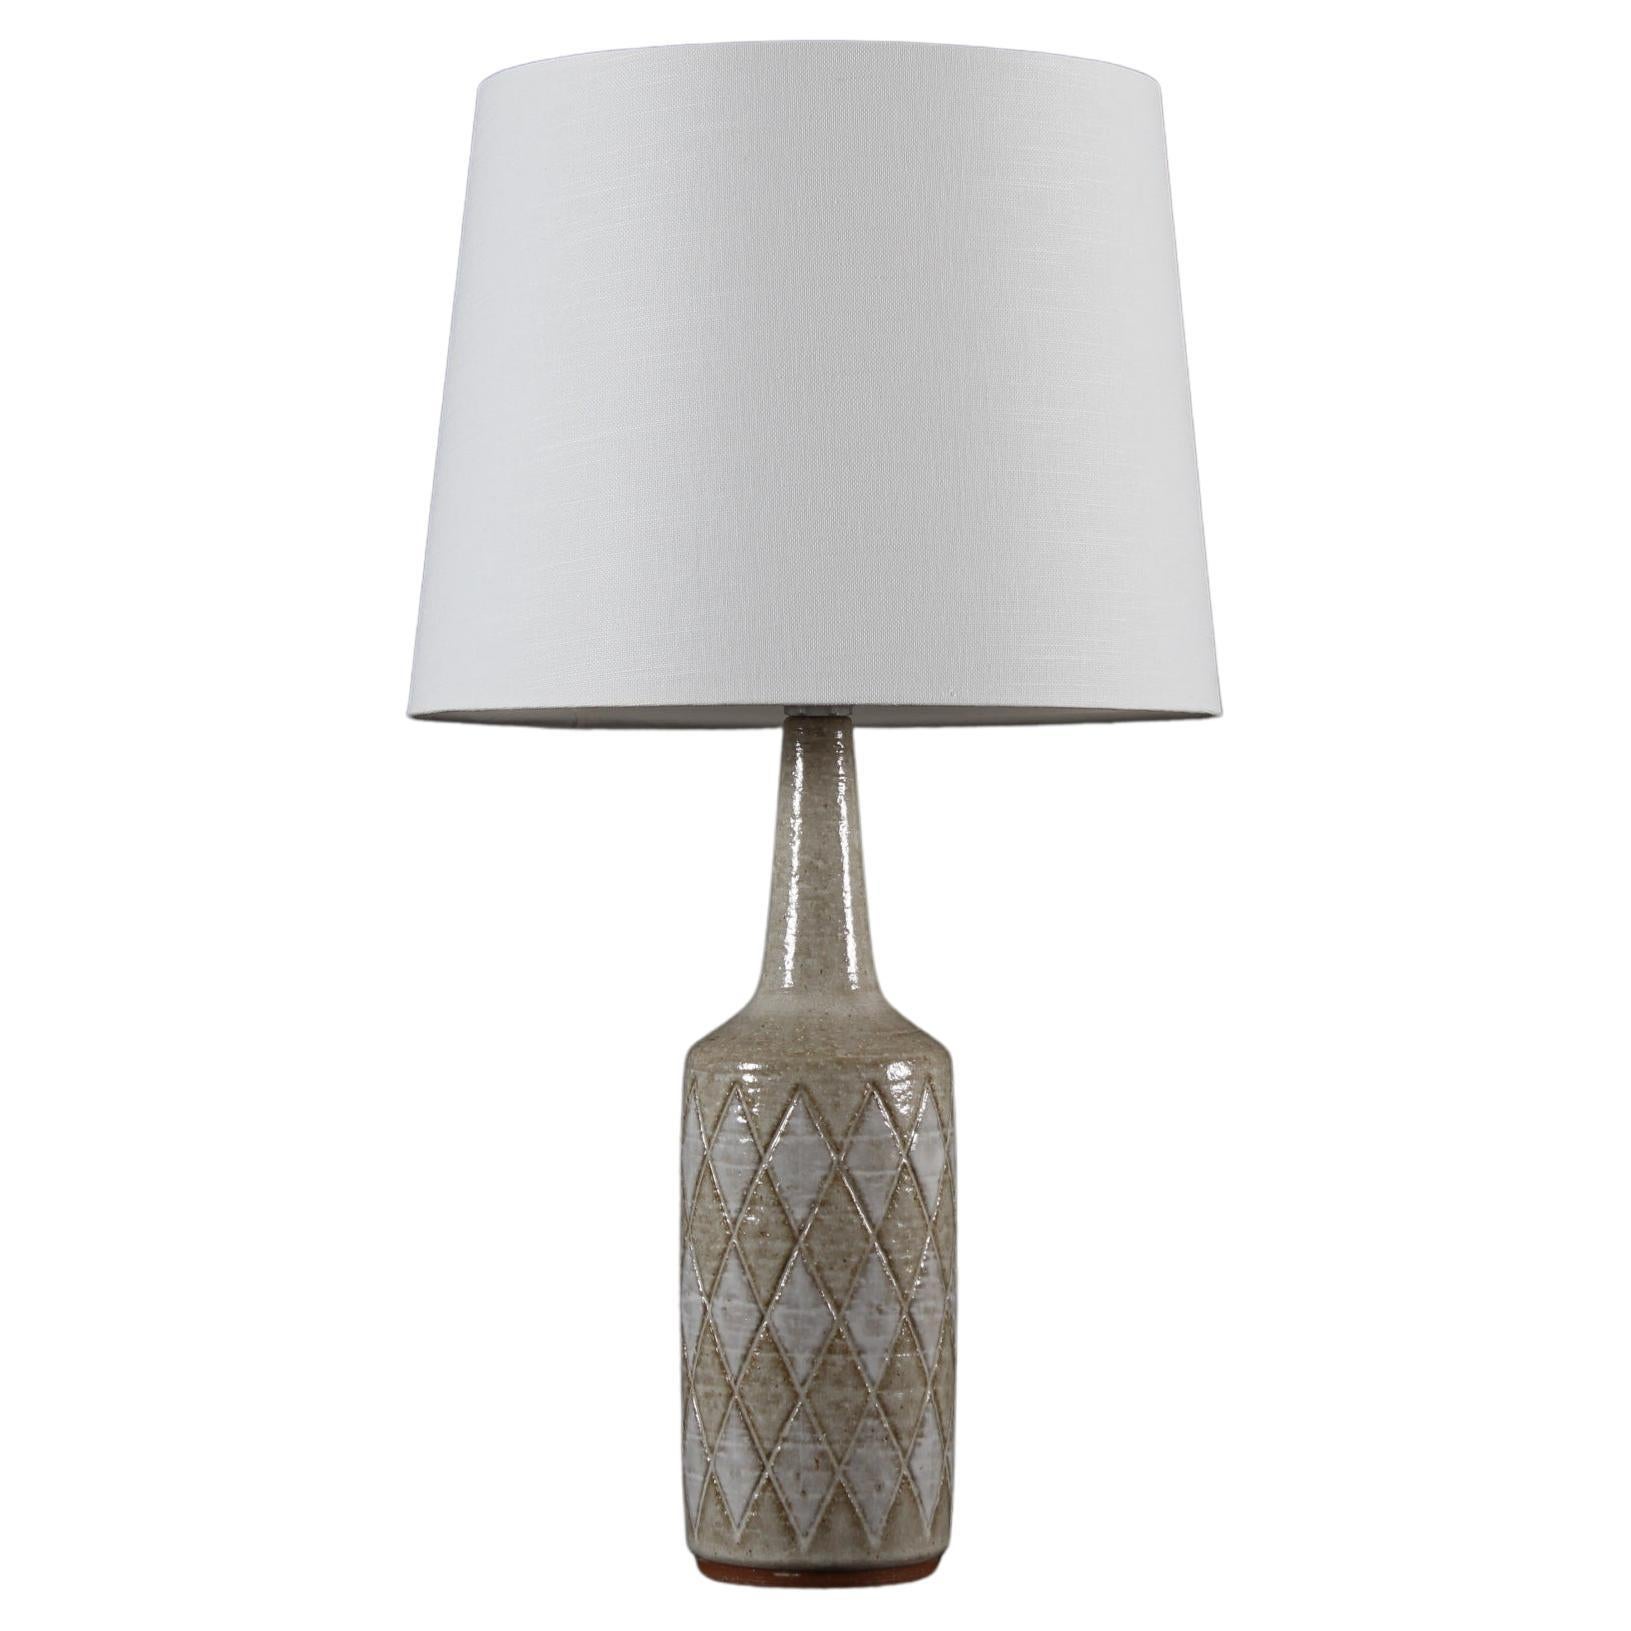 Danish Palshus Table Lamp with Harlequin Checkered Decoration and New Lamp Shade For Sale